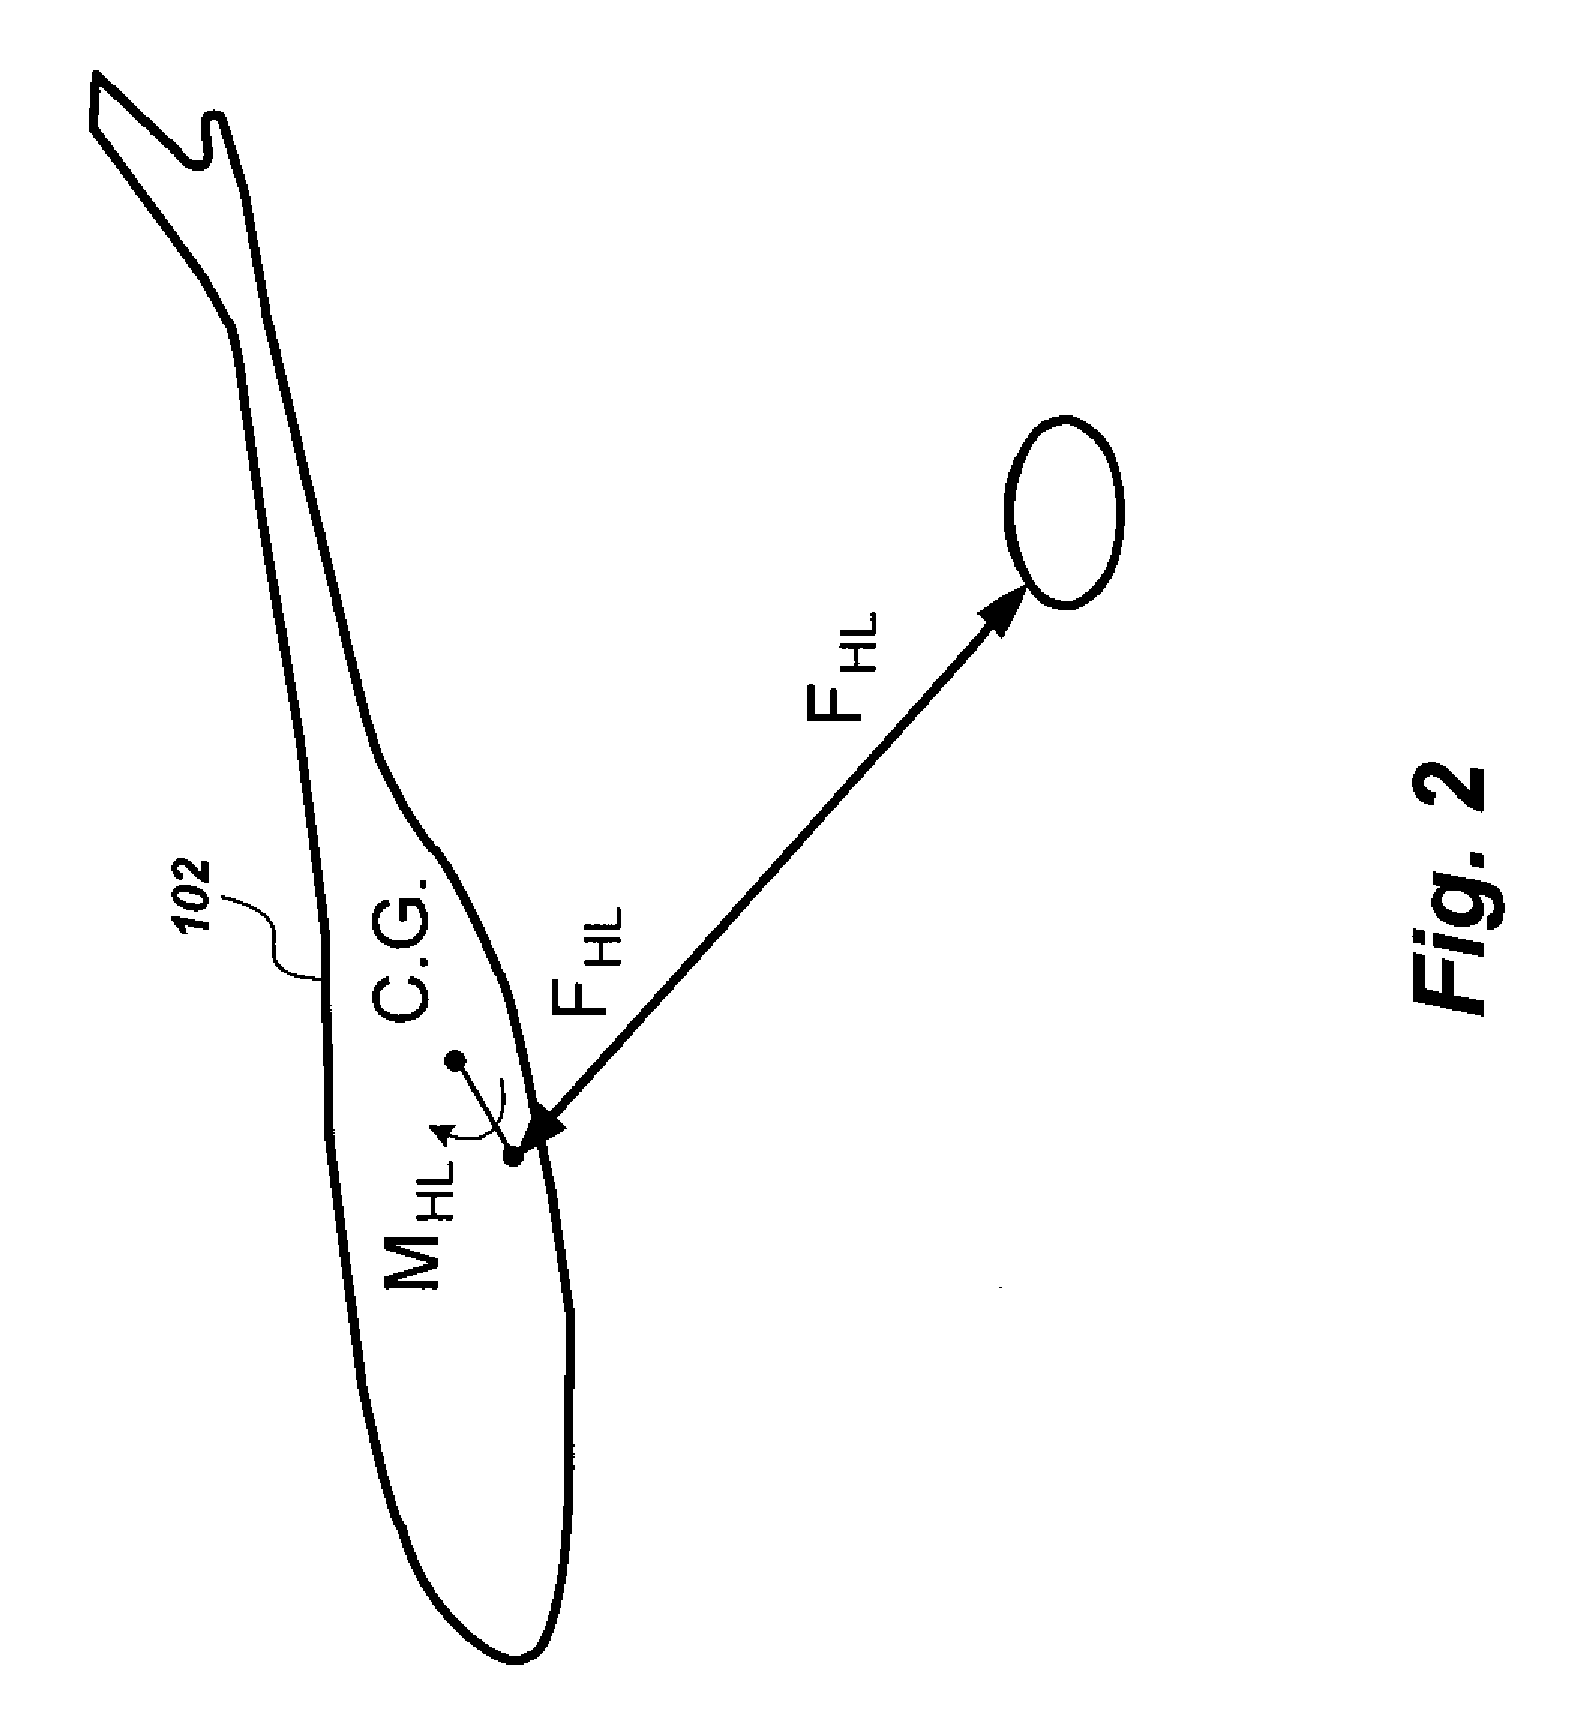 Fuzzy logic-based control method for helicopters carrying suspended loads